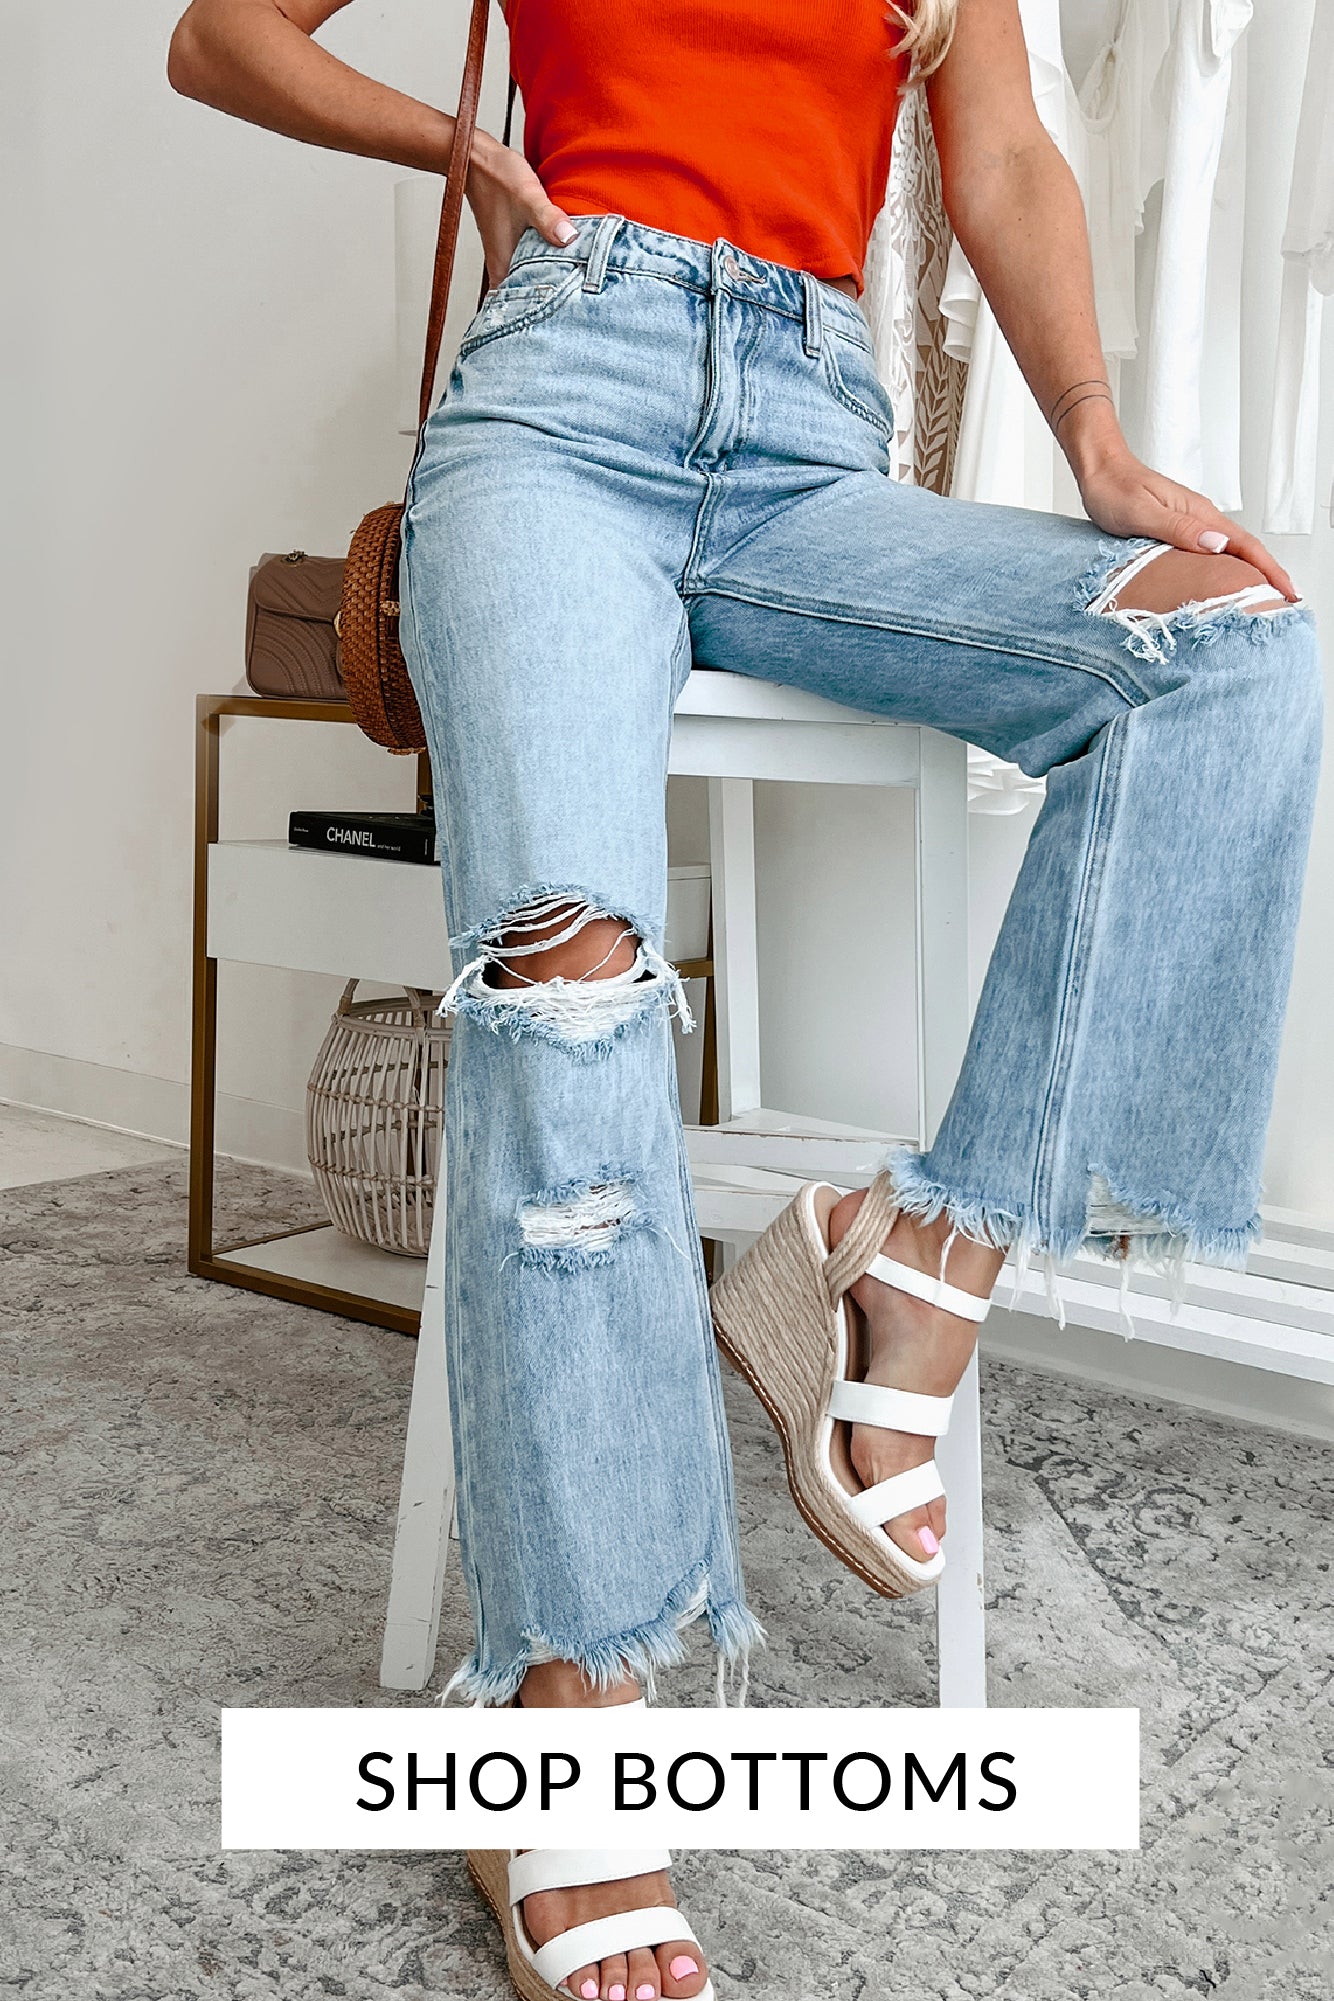 Model wearing distressed light wash denim with an orange bandeau top and white strappy wedges. Call to action says "Shop Bottoms" and links to the bottoms collection.